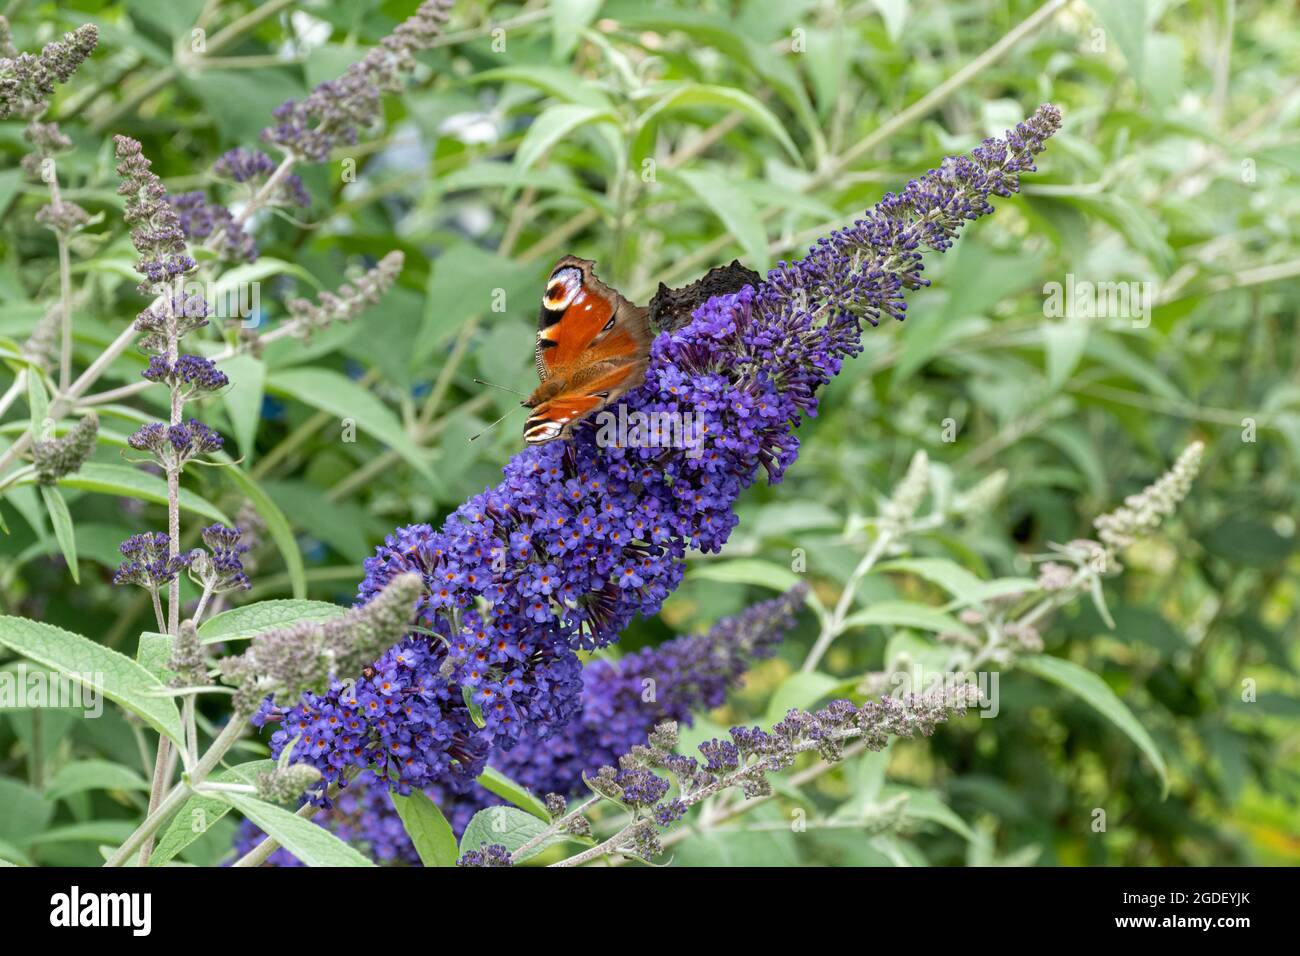 Buddleja davidii 'Ellen's Blue' (buddleia variety), known as a butterfly bush, in flower during  summer, UK, with a peacock butterfly (Aglais io) Stock Photo